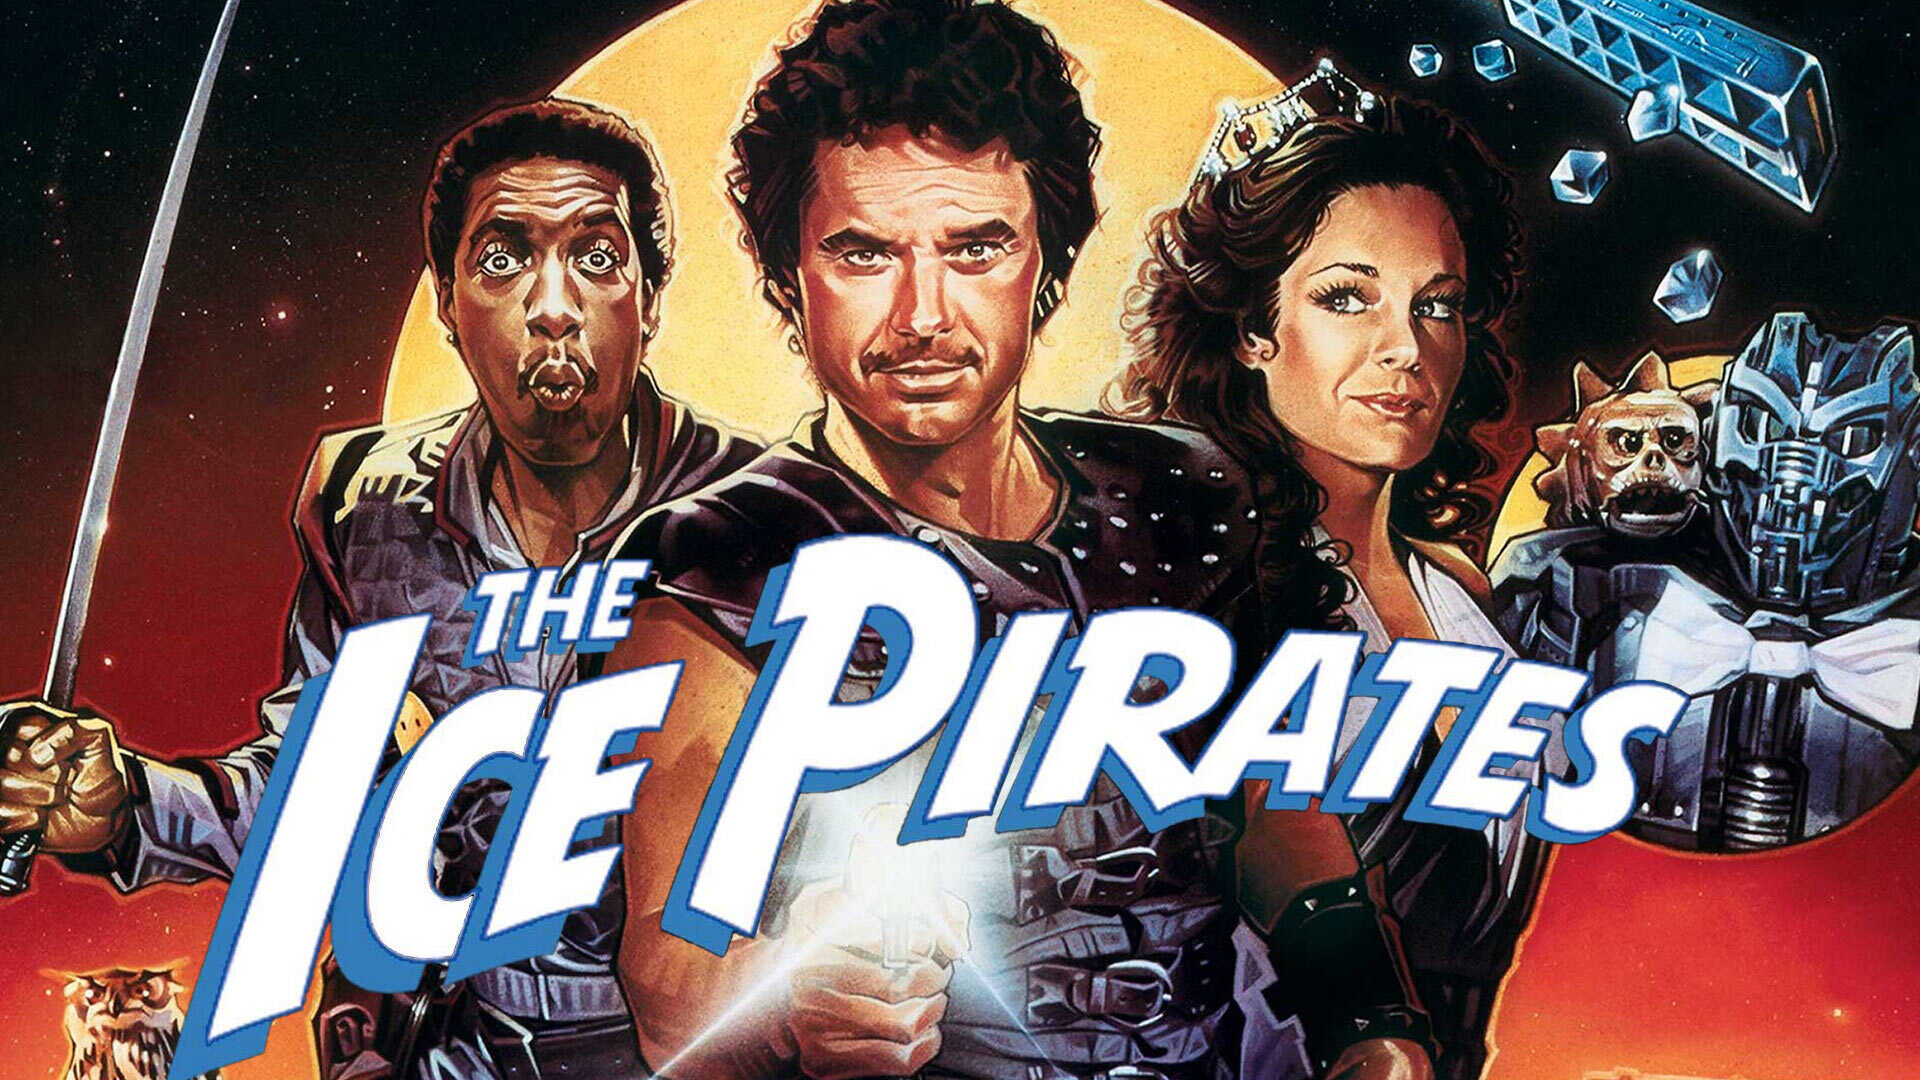 45-facts-about-the-movie-the-ice-pirates